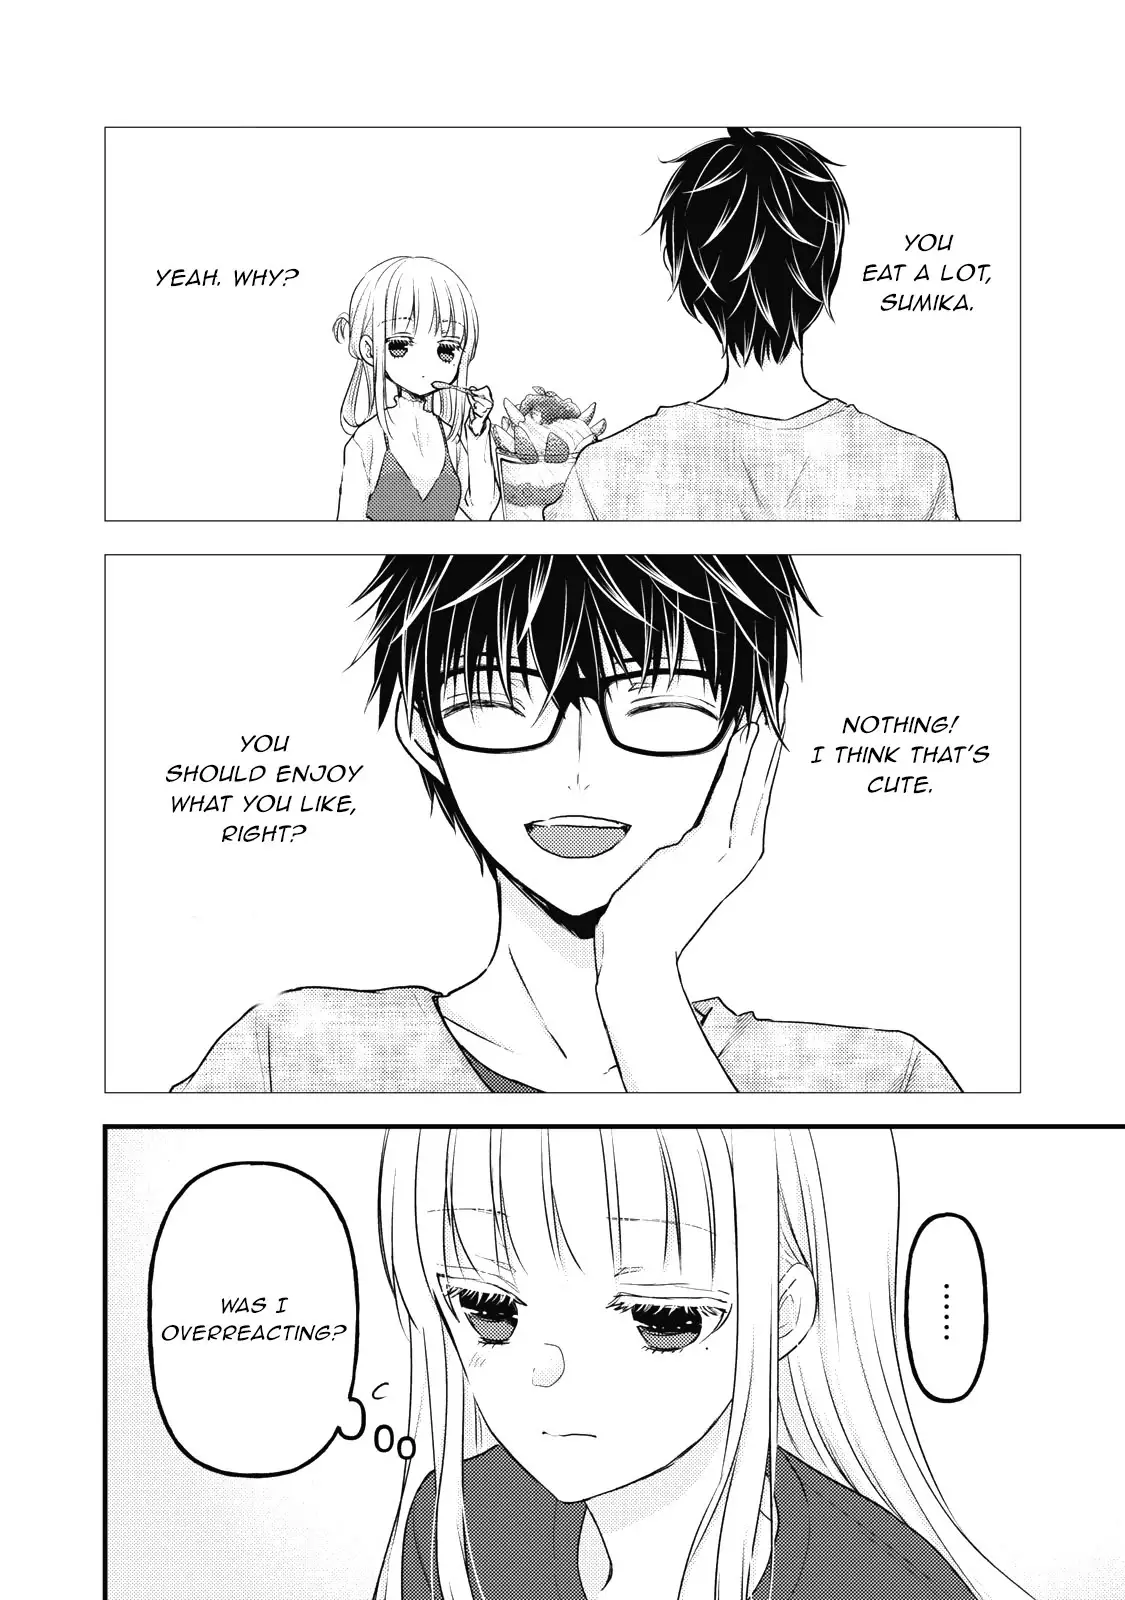 We May Be An Inexperienced Couple But... - 88 page 13-c4ae5cfe